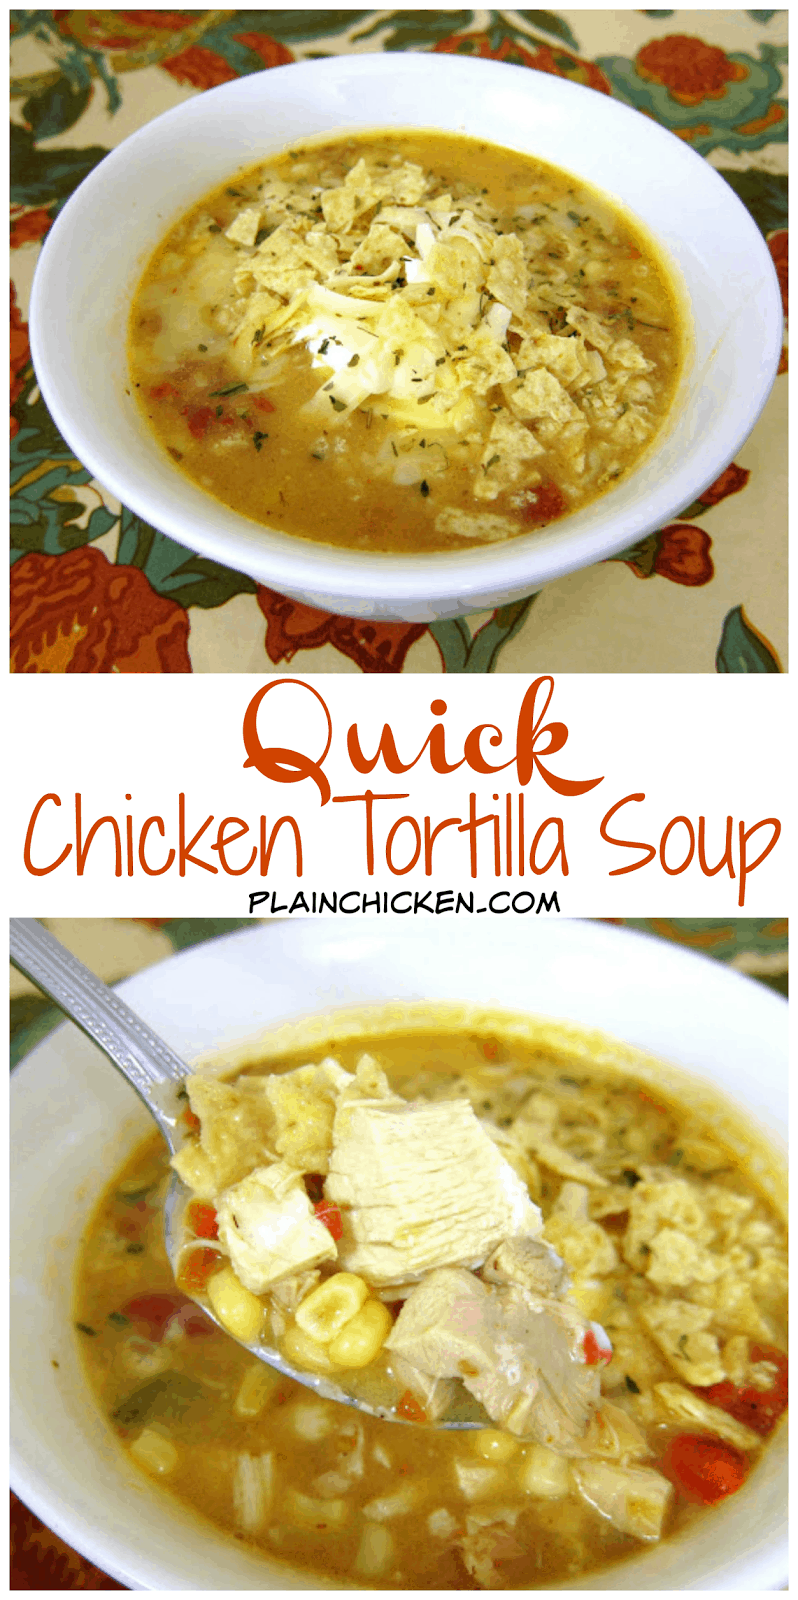 Quick Chicken Tortilla Soup - use rotisserie chicken for a super quick soup that is ready in 10 minutes! Chicken broth, Rotel, corn, chicken, cream of chicken soup, chili powder, garlic and onion. Top with sour cream, tortilla chips and cheese. We love to make this quick soup during the week! Serve with some warm bread or cornbread.